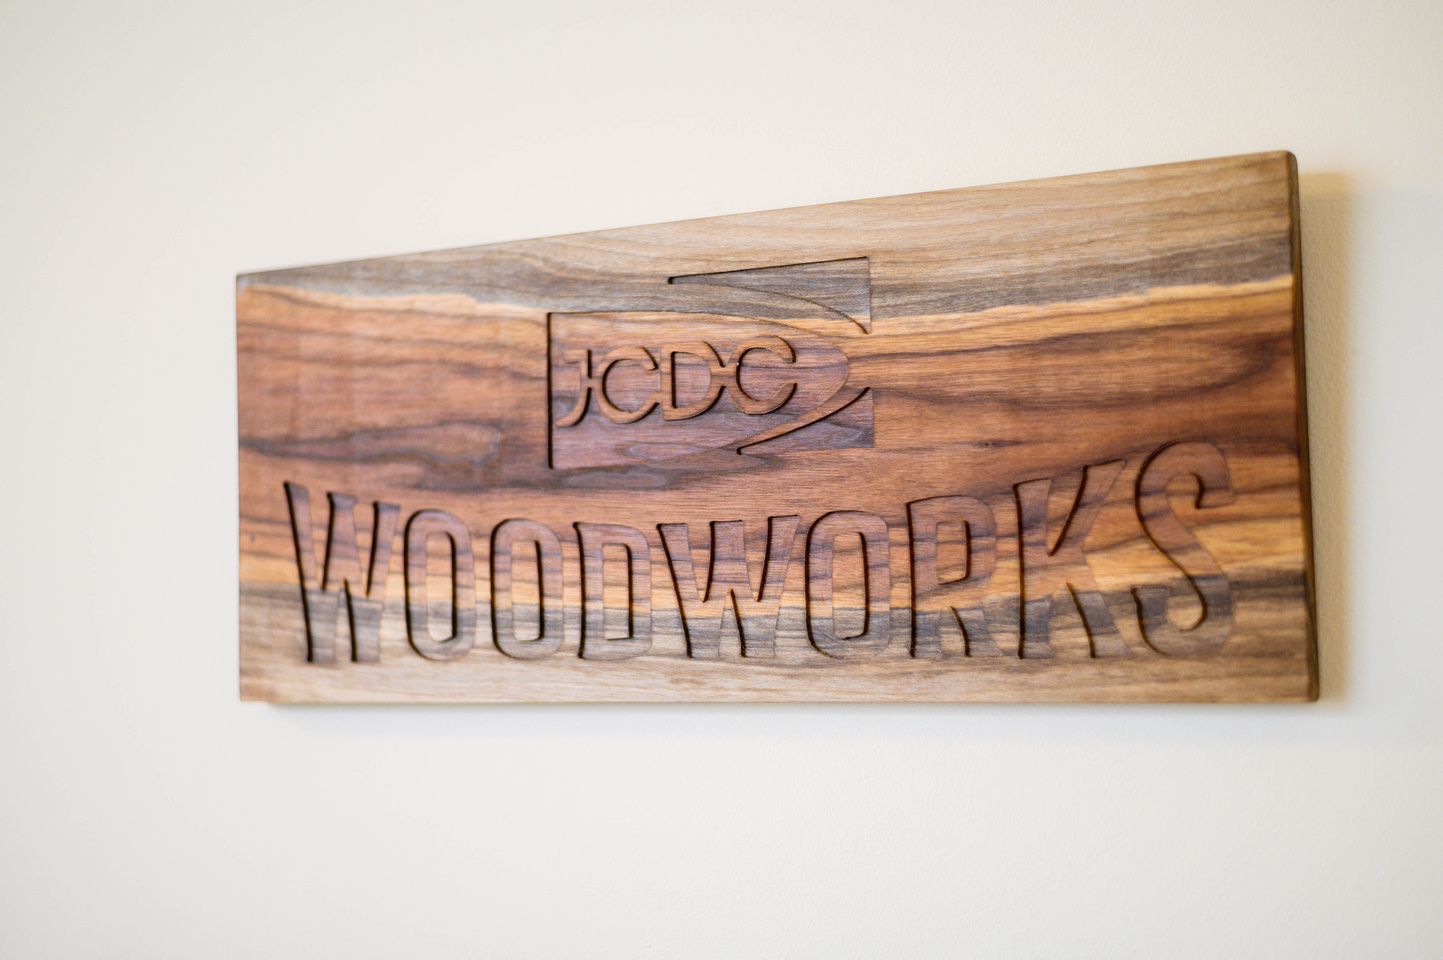 JCDC Woodworks: A passion for woodcraft creates jobs for disabled persons